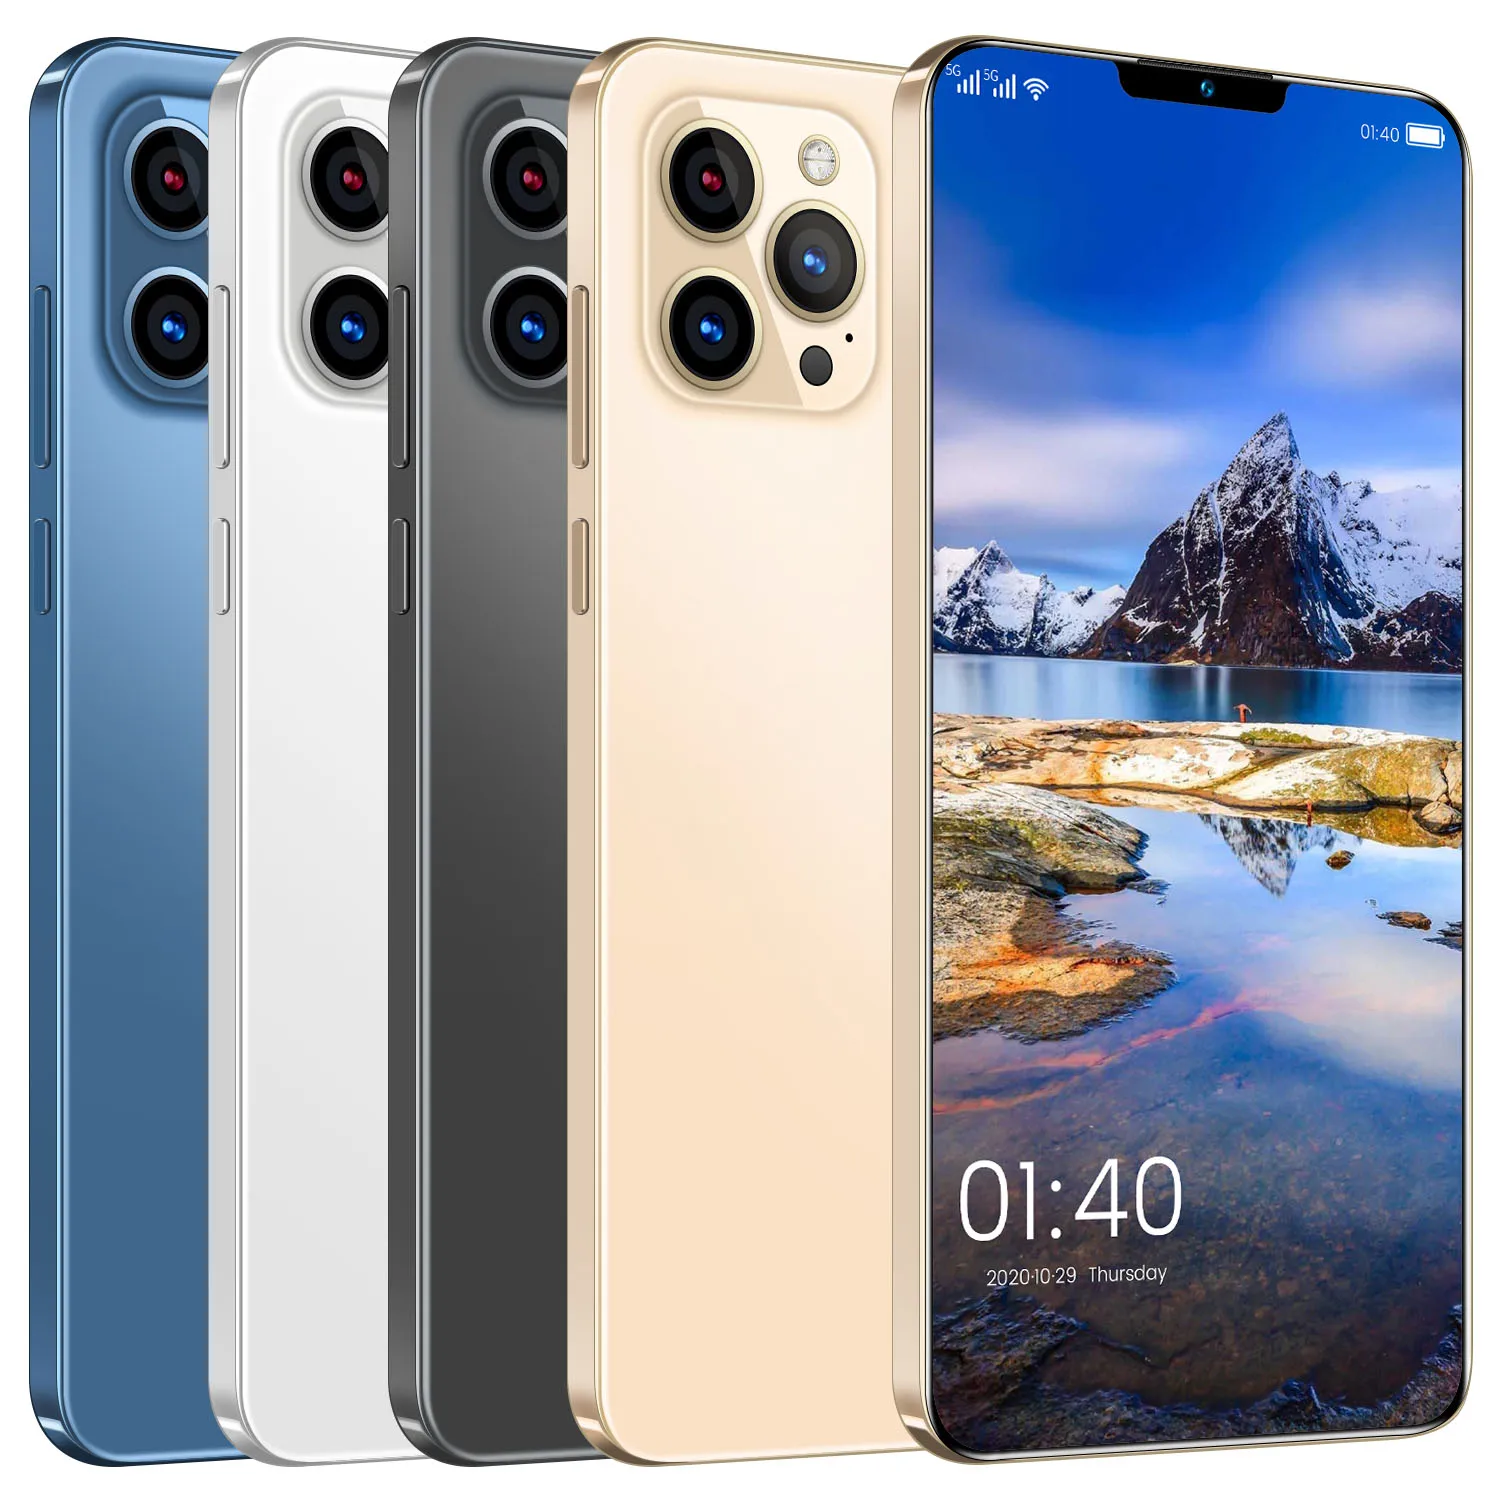 

Original Phone12 pro max 6.7inch Face ID MobilePhone 12GB+512GB Android 10 5200mAh Smartphone HD 1440x3040 Dual cards cellphone